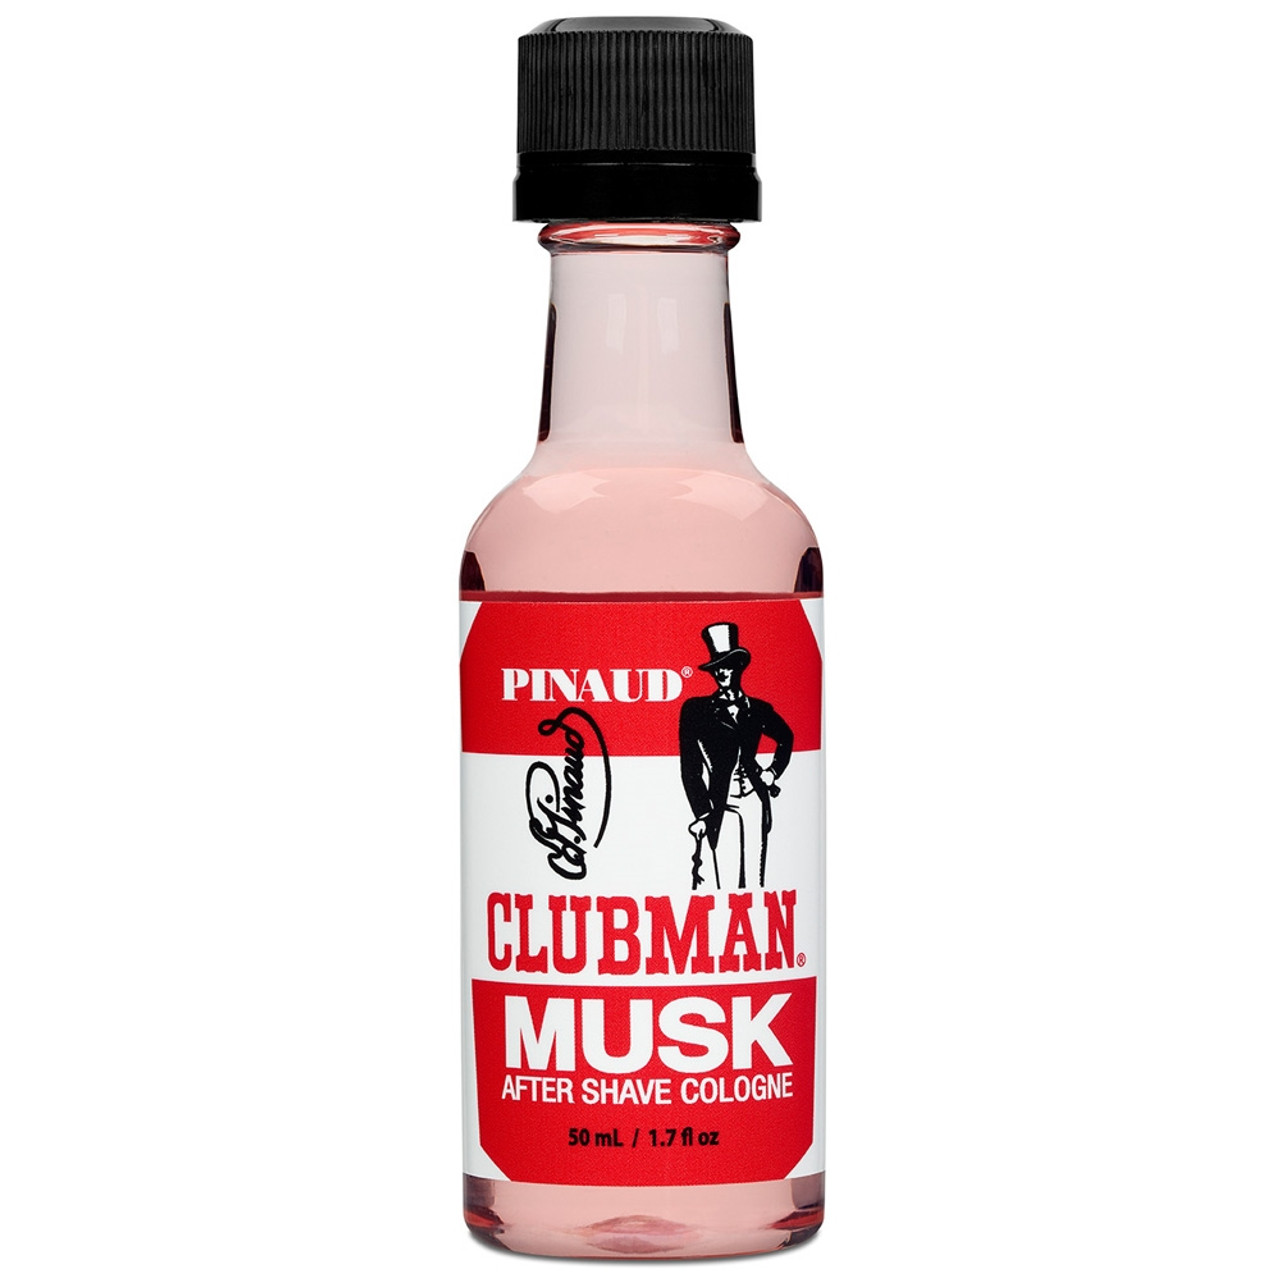 Clubman Musk After Shave 1.7oz